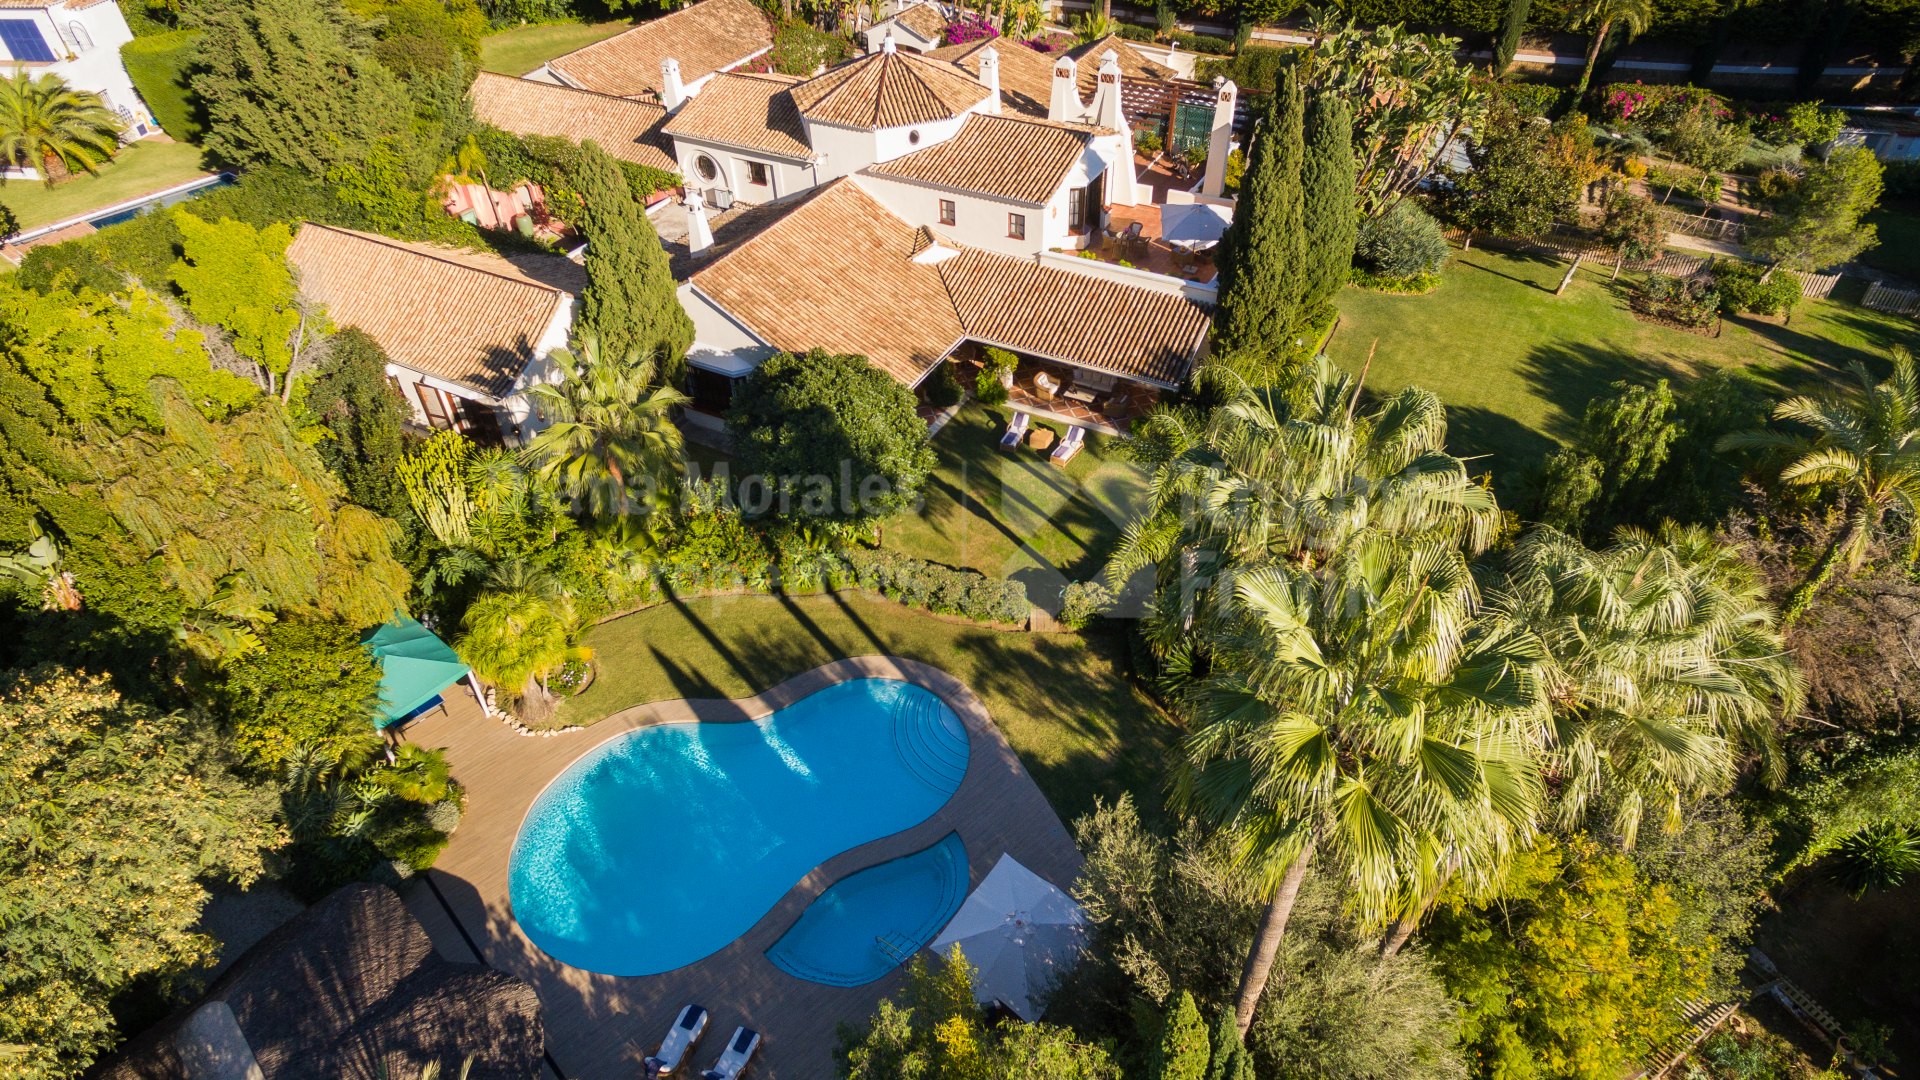 Marbella Hill Club, Ten bedroom villa for rent with andalusian charm